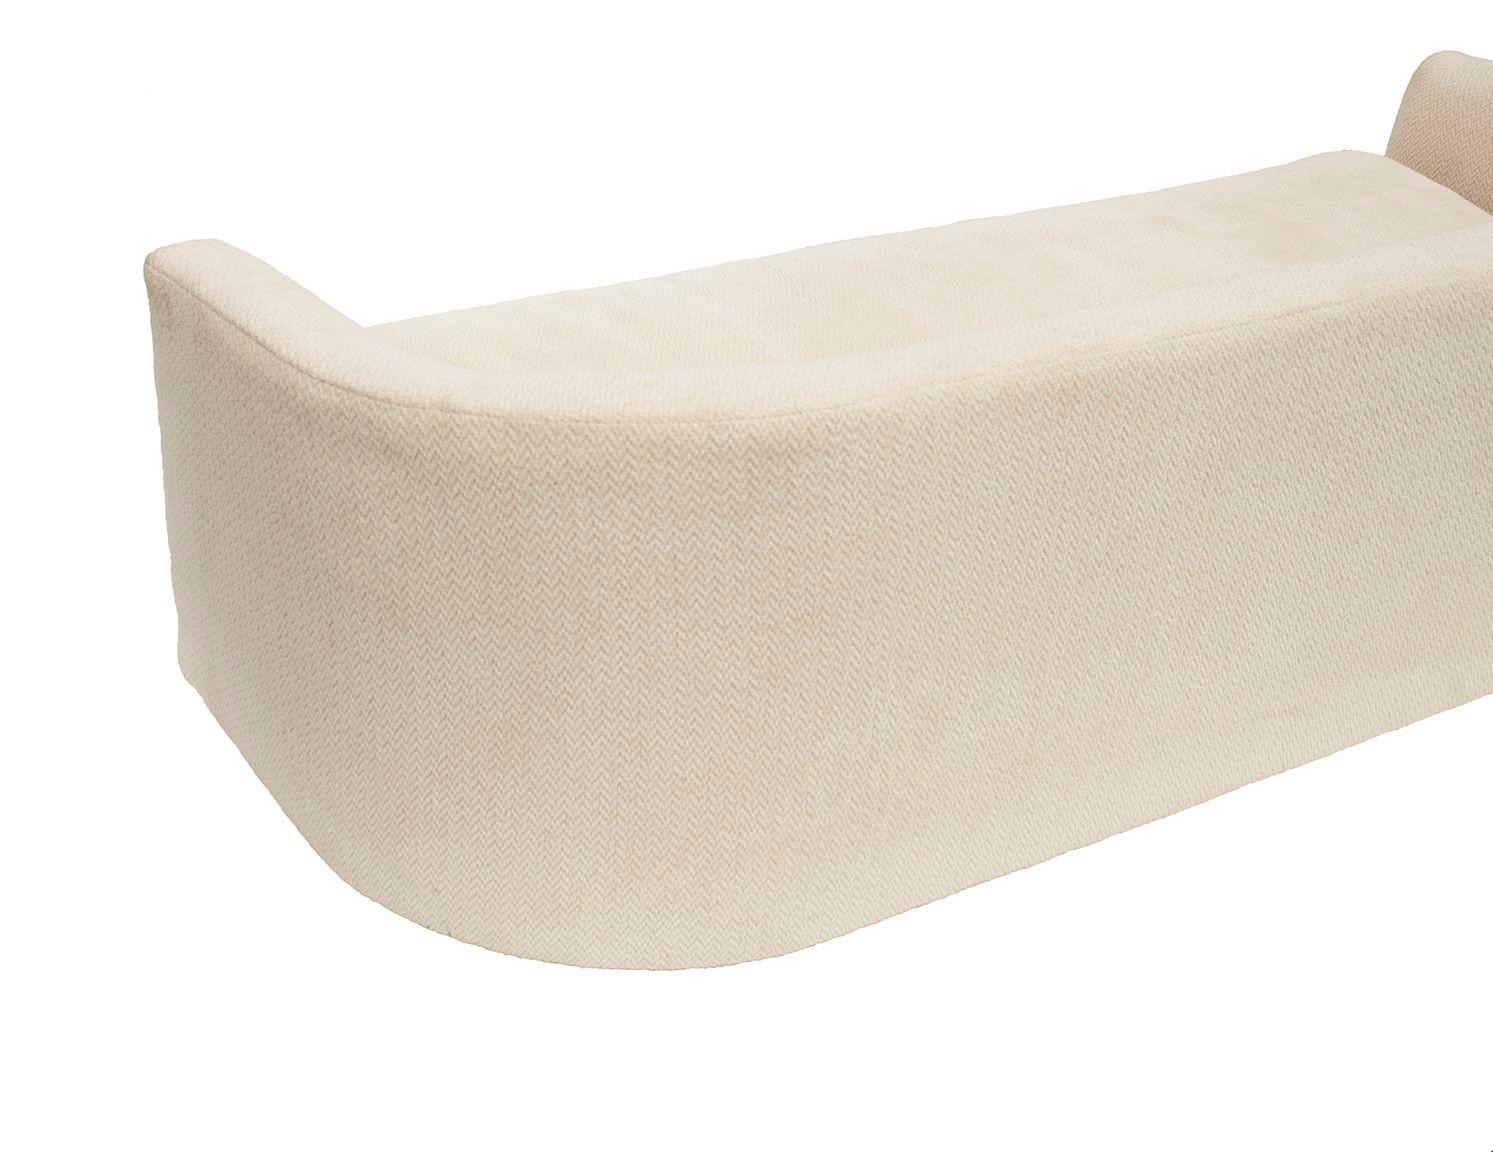 Custom Sofa on Casters in Cream Boucle #1 For Sale 3